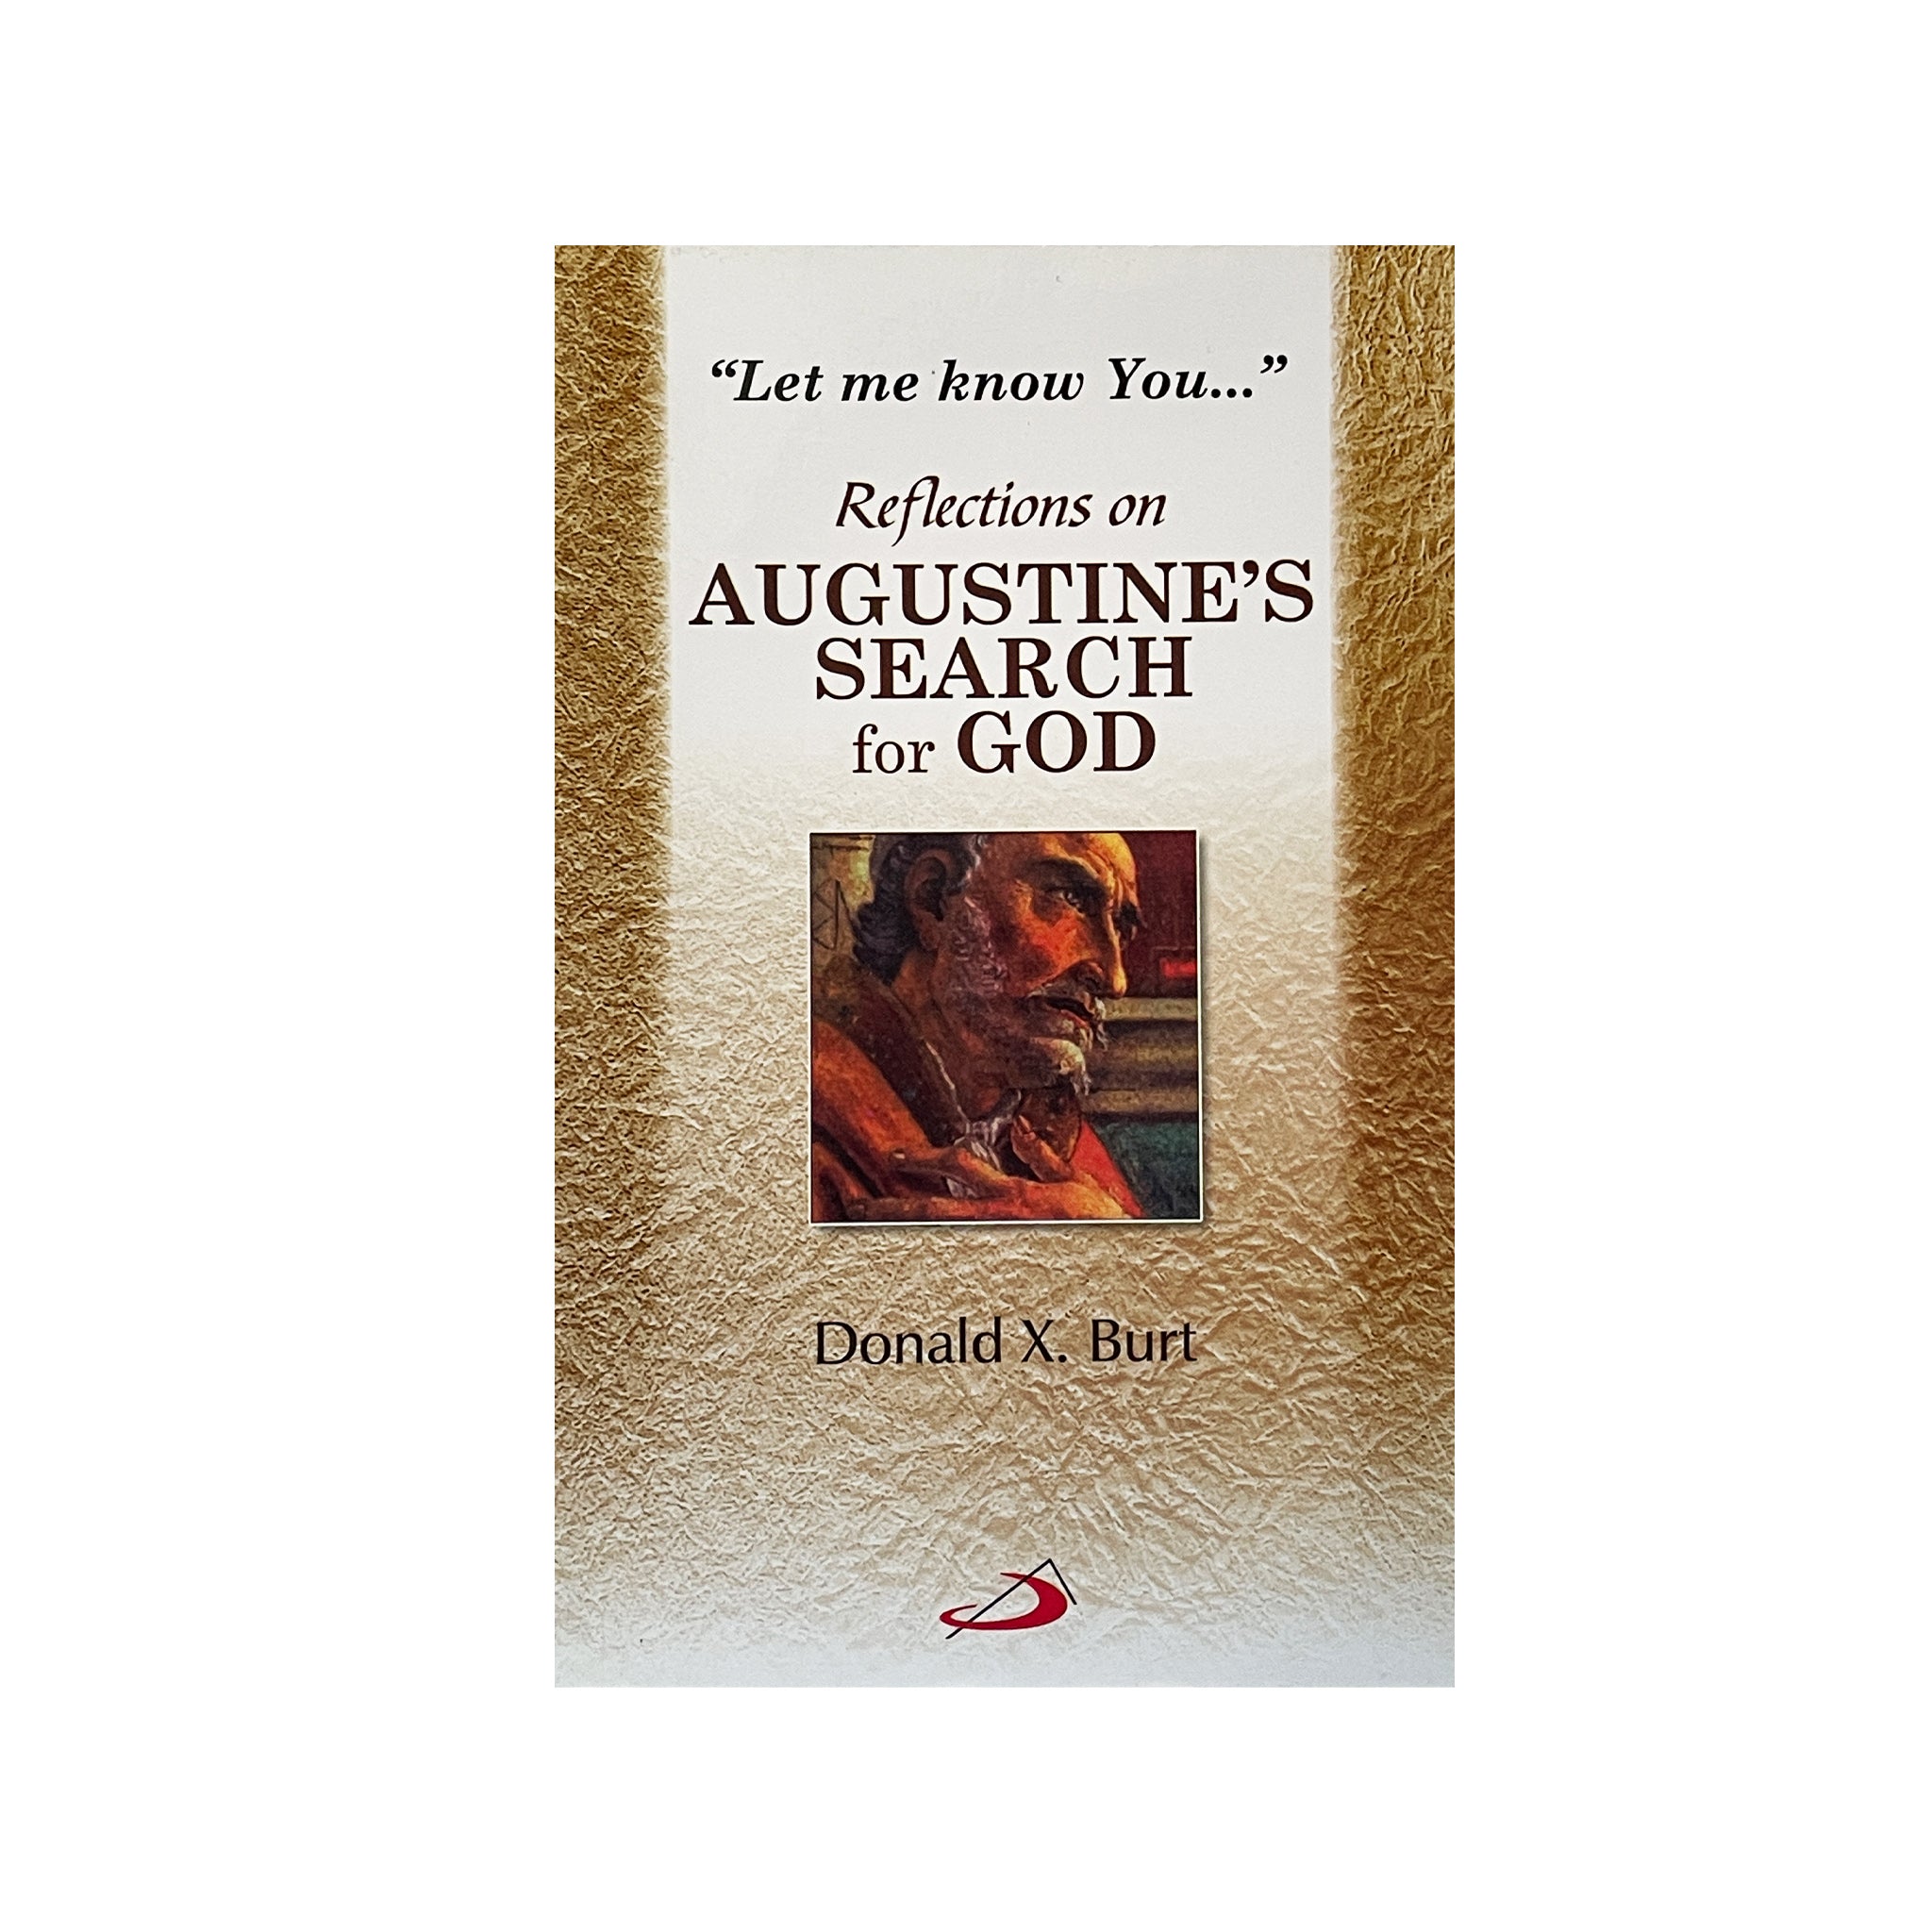 REFLECTIONS ON AUGUSTINE'S SEARCH FOR GOD